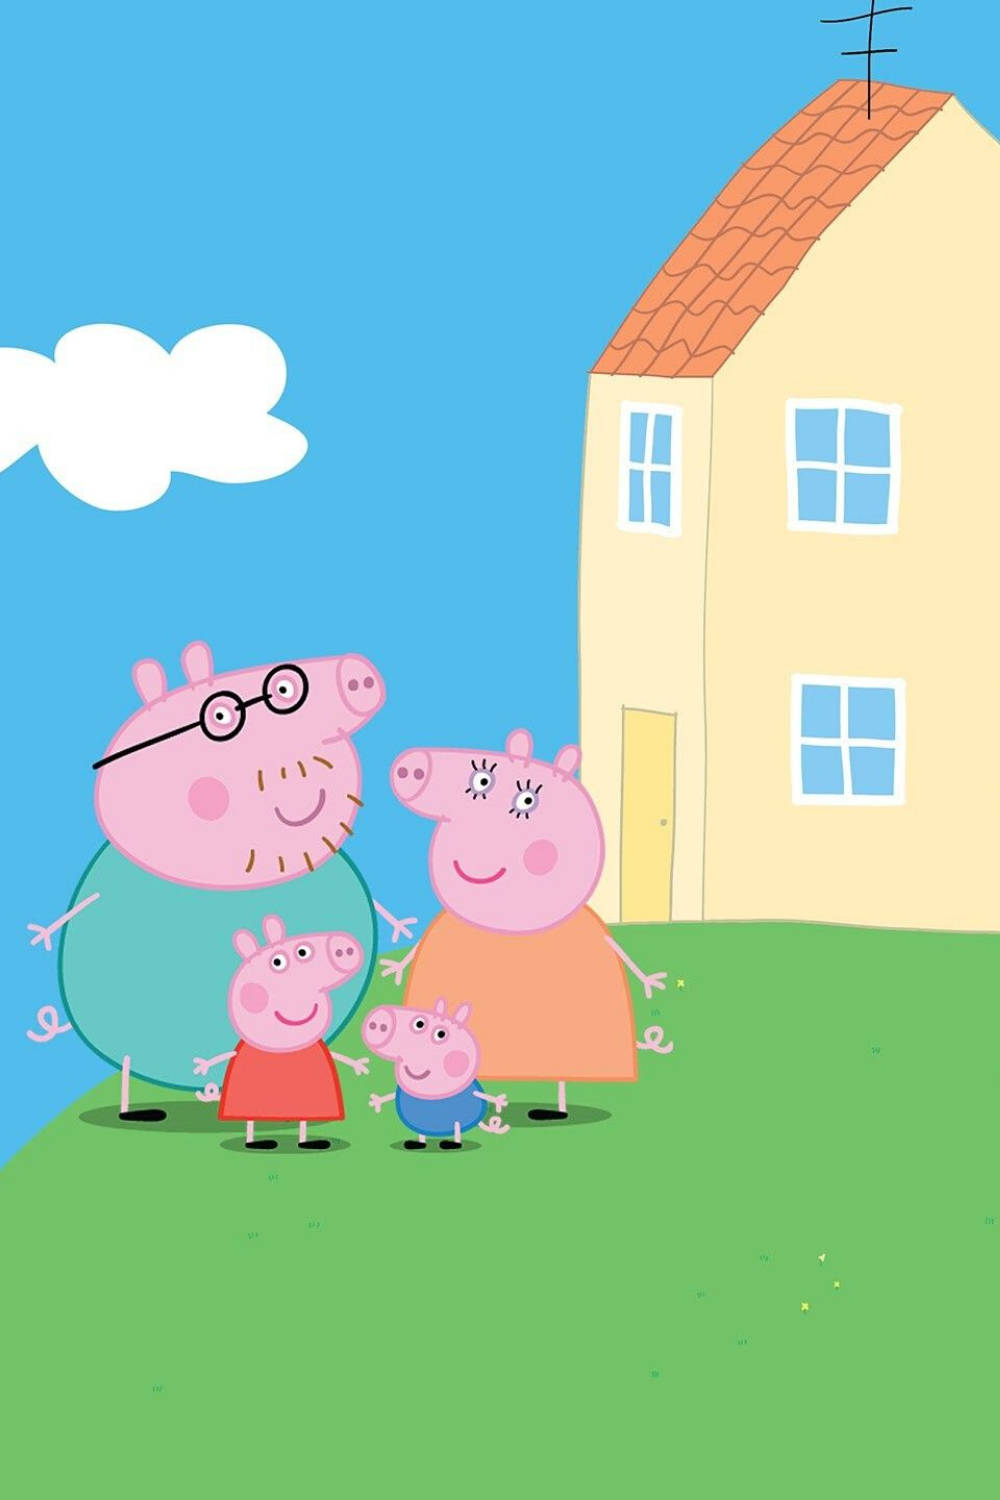 Welcome to everyone's favorite, the Sweet Peppa Pig House! Wallpaper